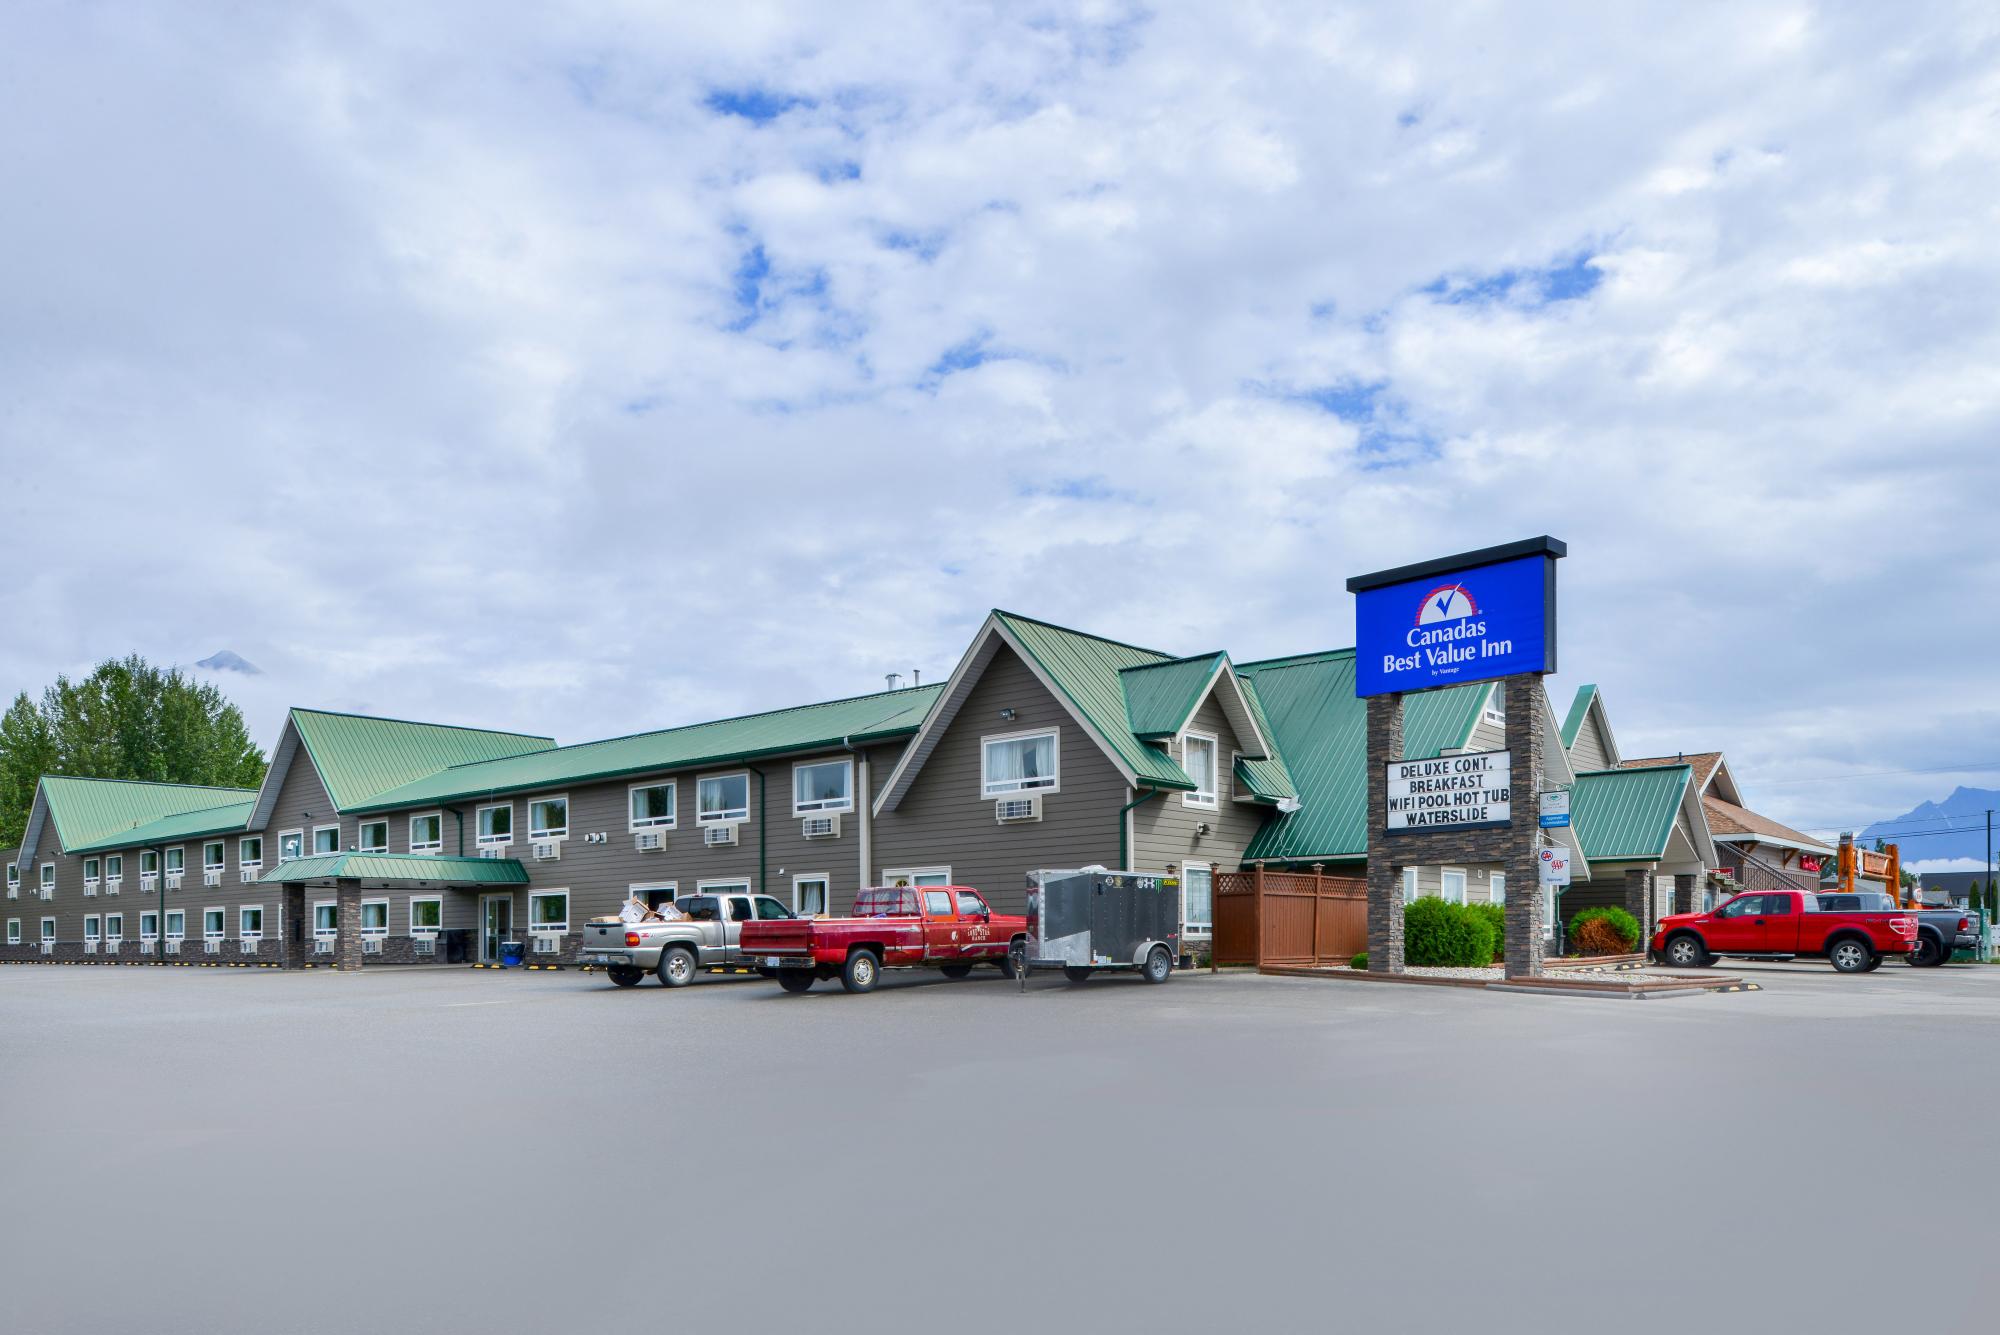 Hotel exterior and parking lot with sign